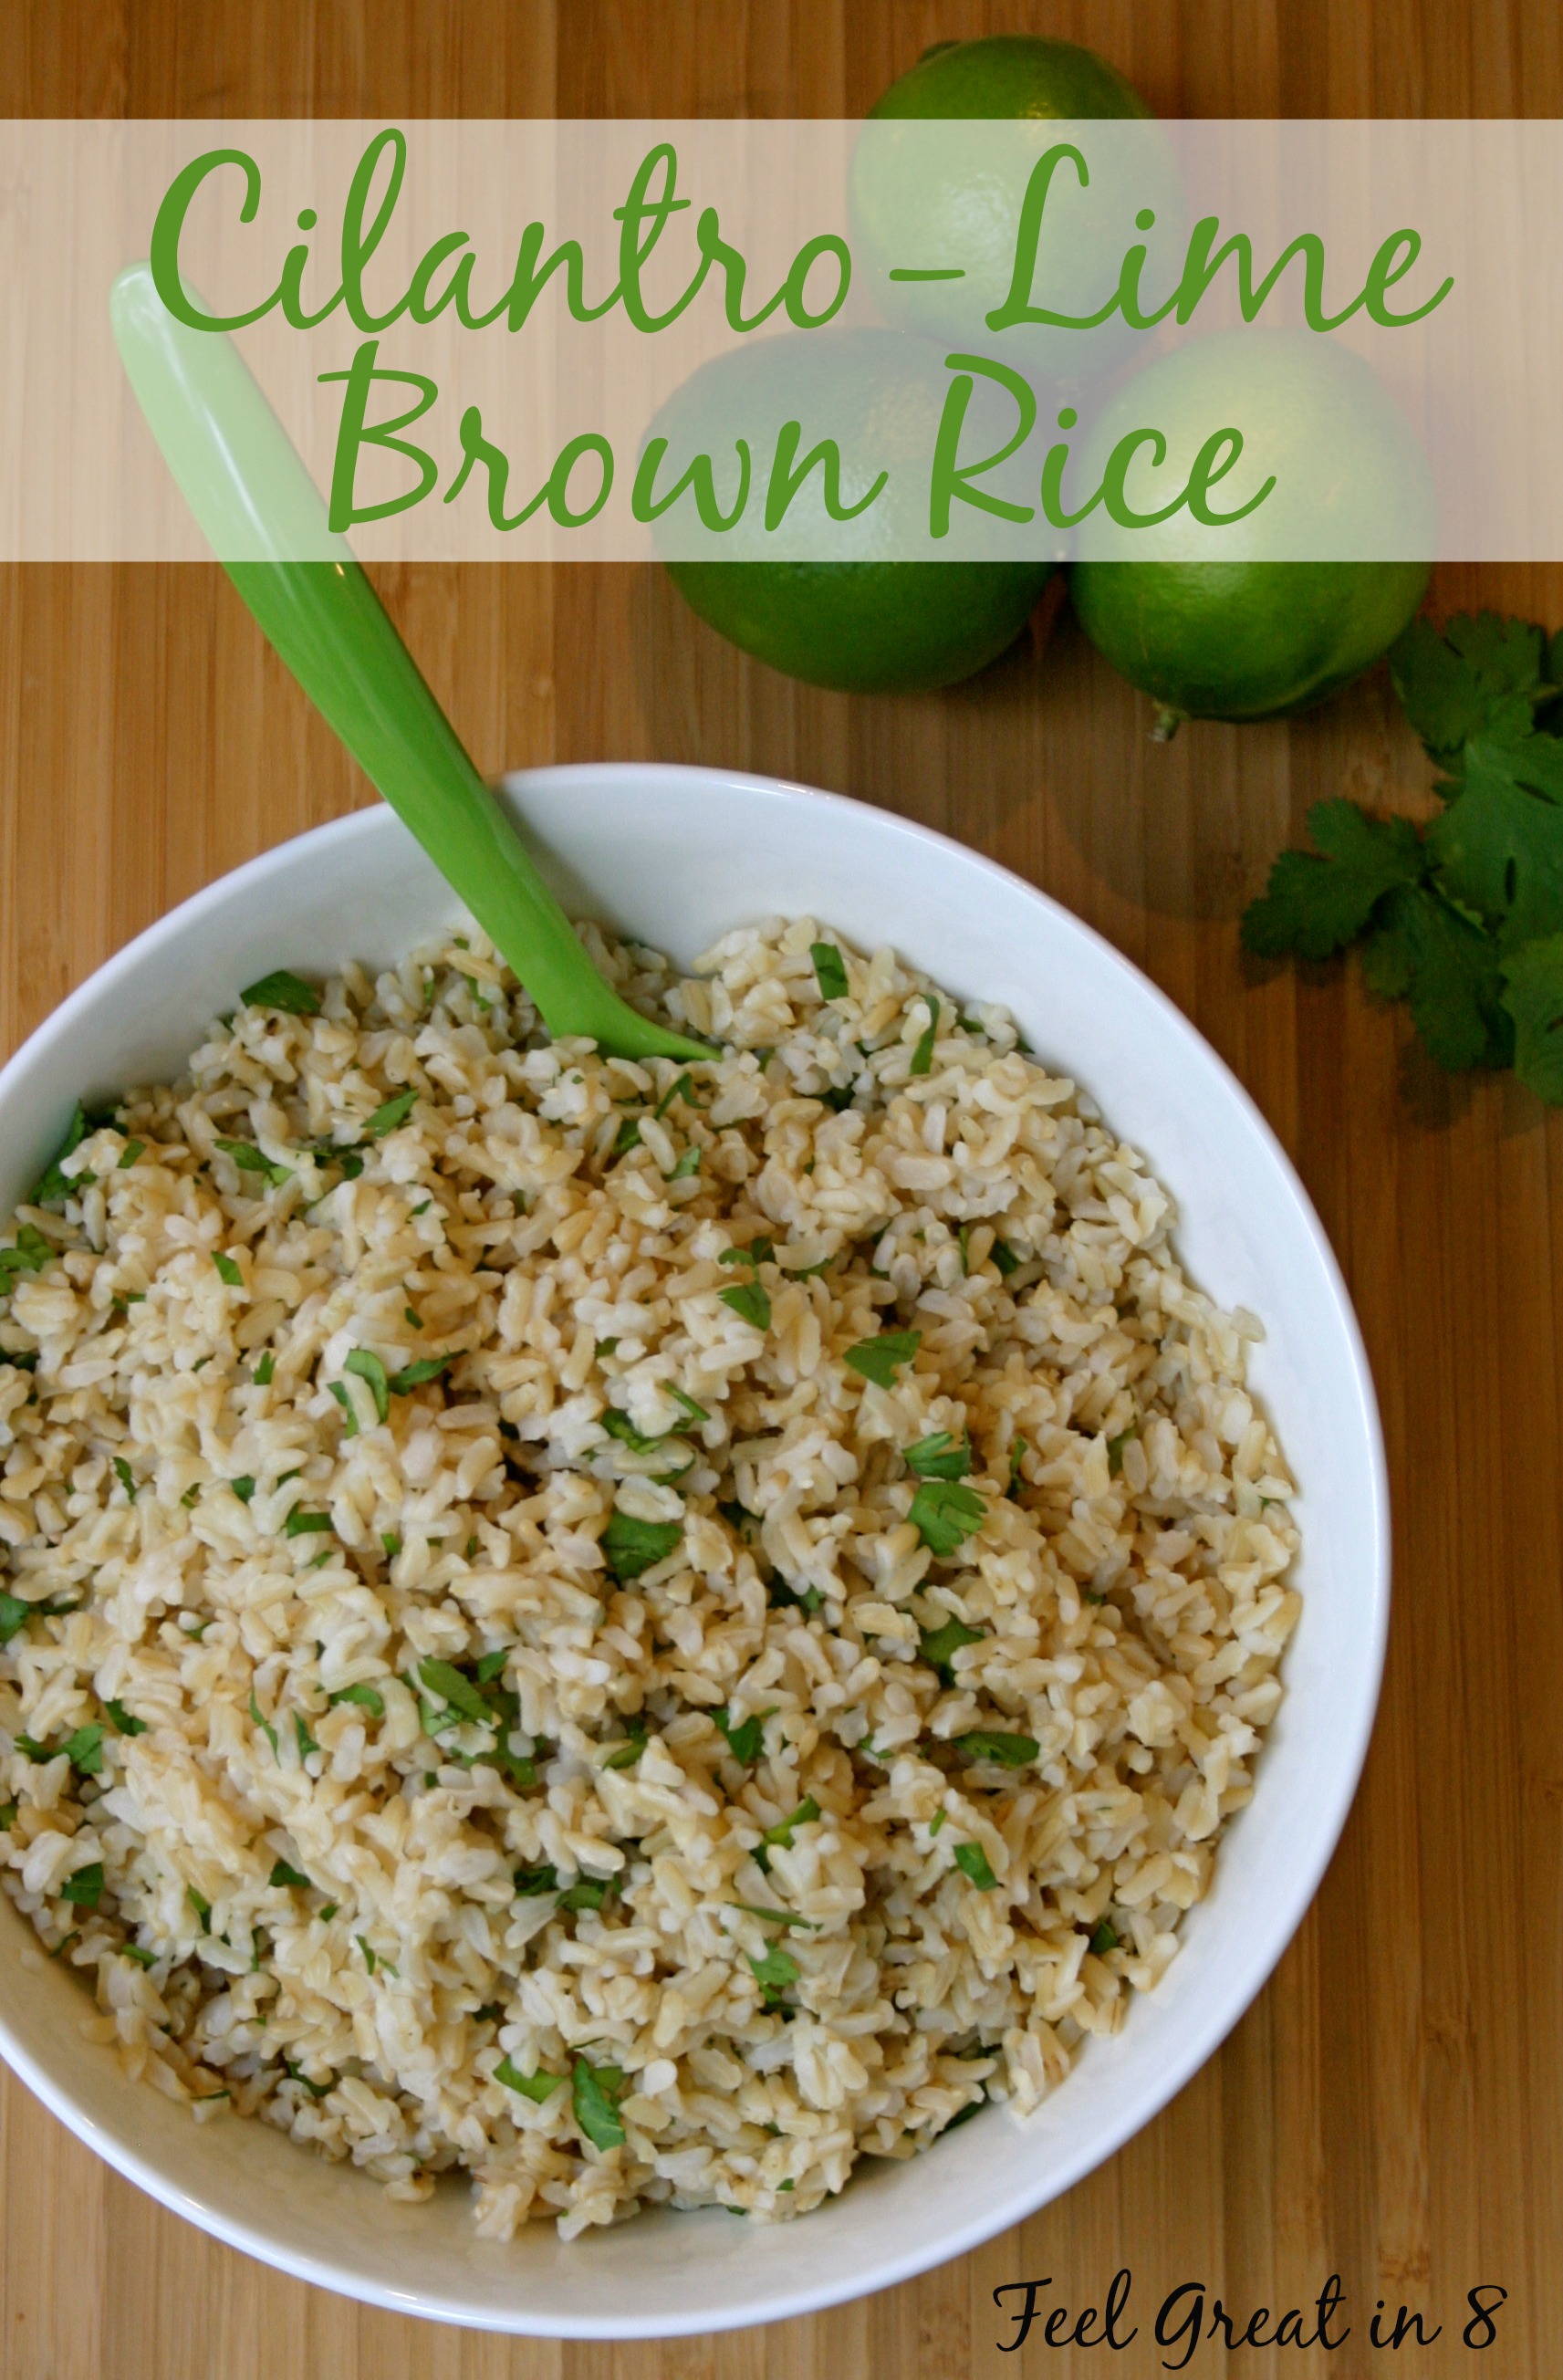 This Cilantro Lime Brown Rice is so fresh and delicious, quick and easy to make, and perfect paired with any mexican food dish! | Feel Great in 8 - Healthy Real Food Recipes